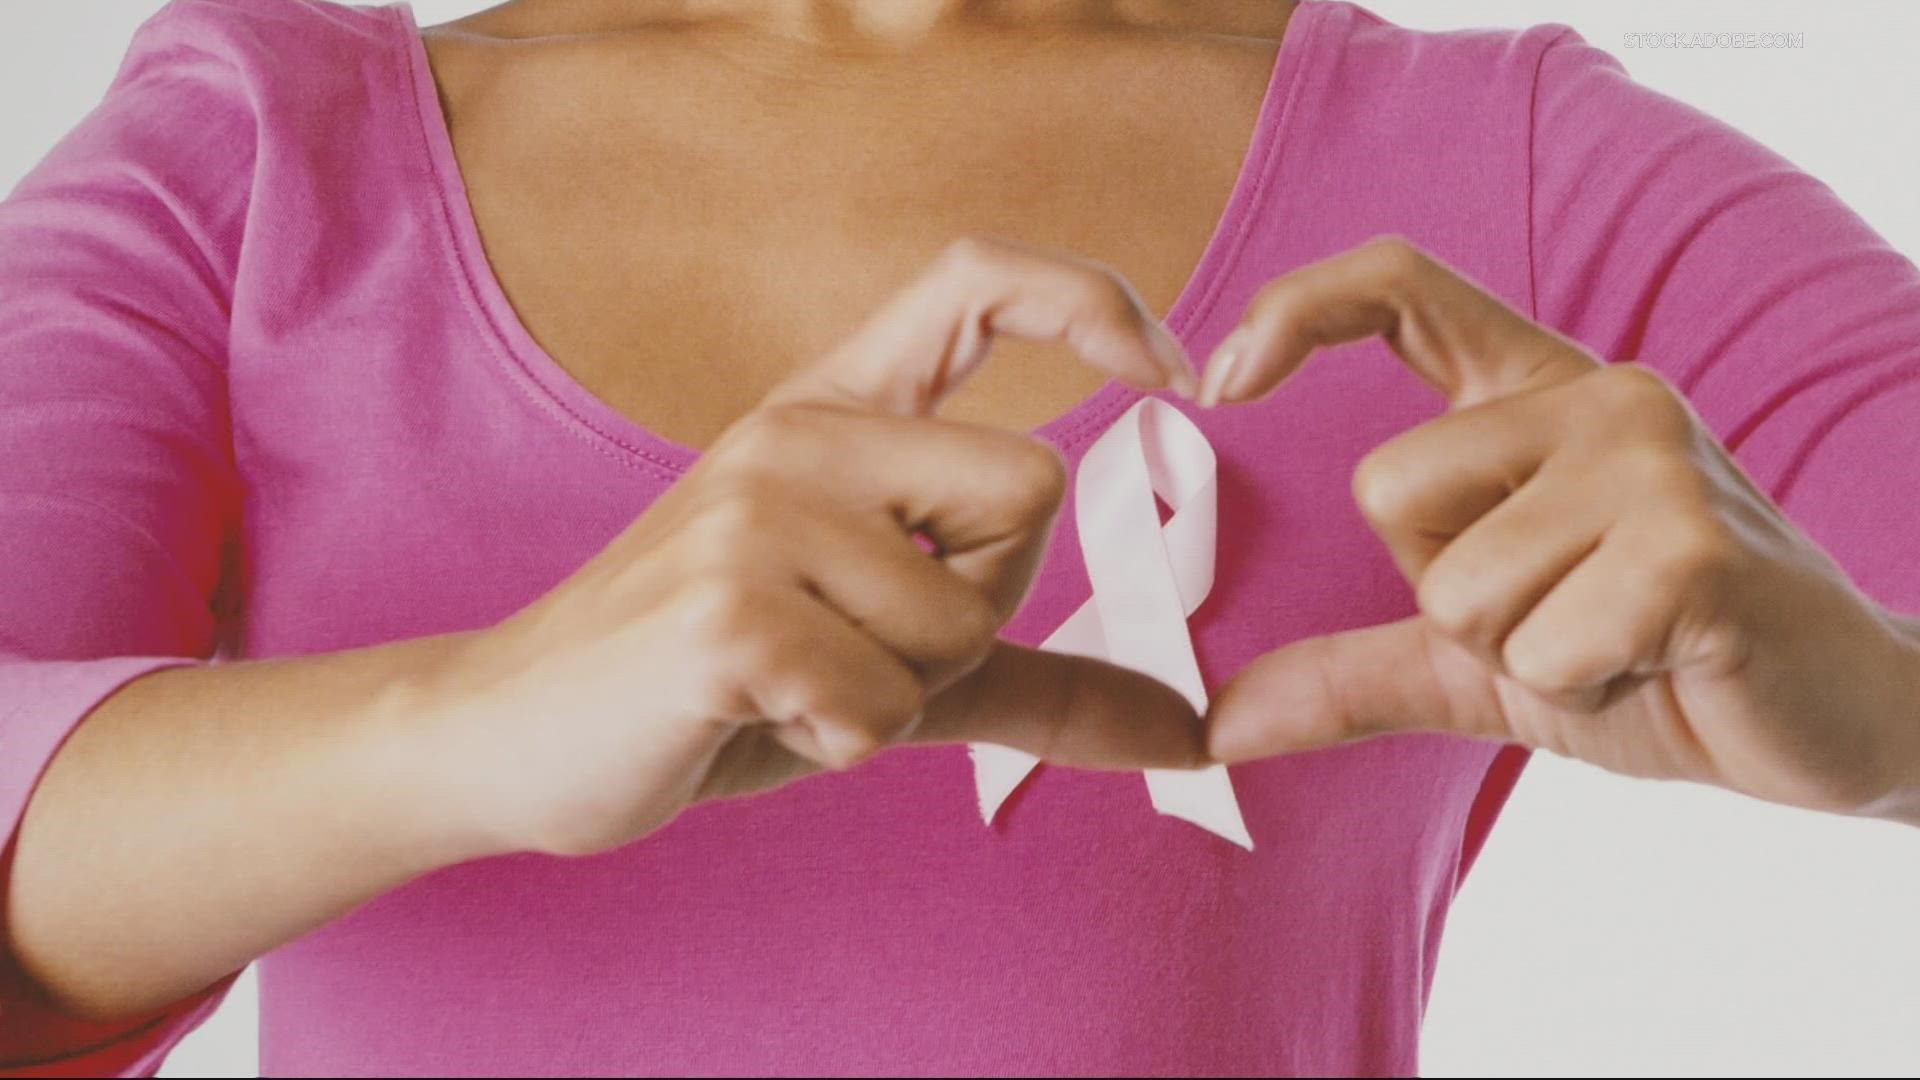 On Oct. 23, NAACP Portland is hosting Power in Pink, live event on Facebook to honor breast cancer survivors and acknowledge disparities among Black women.